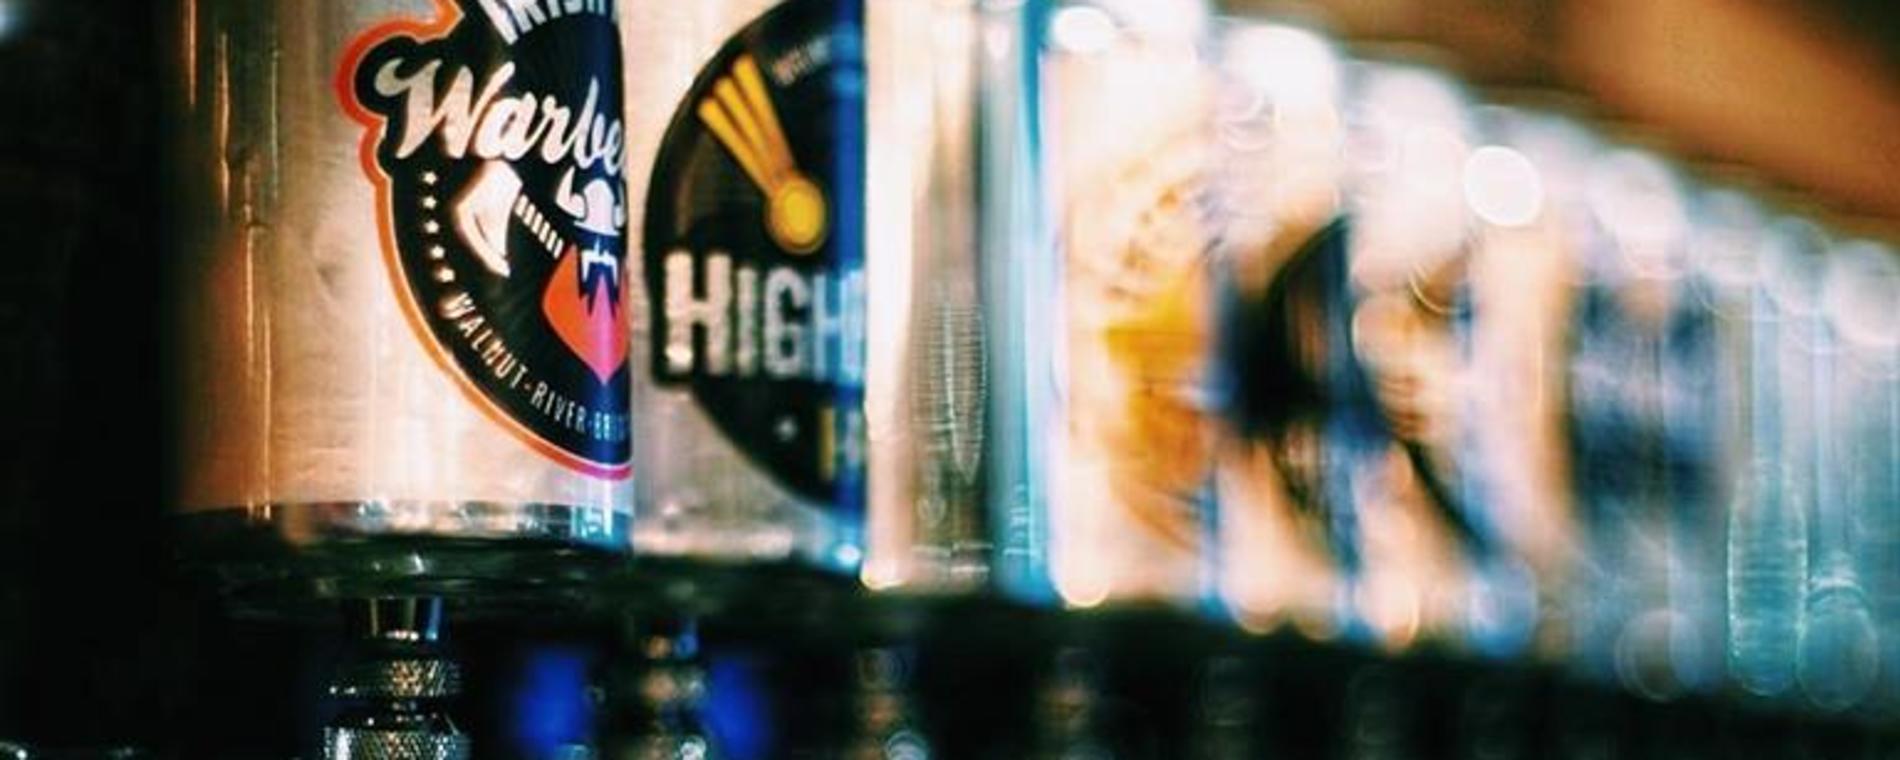 PourHouse beer can taps Visit Wichita